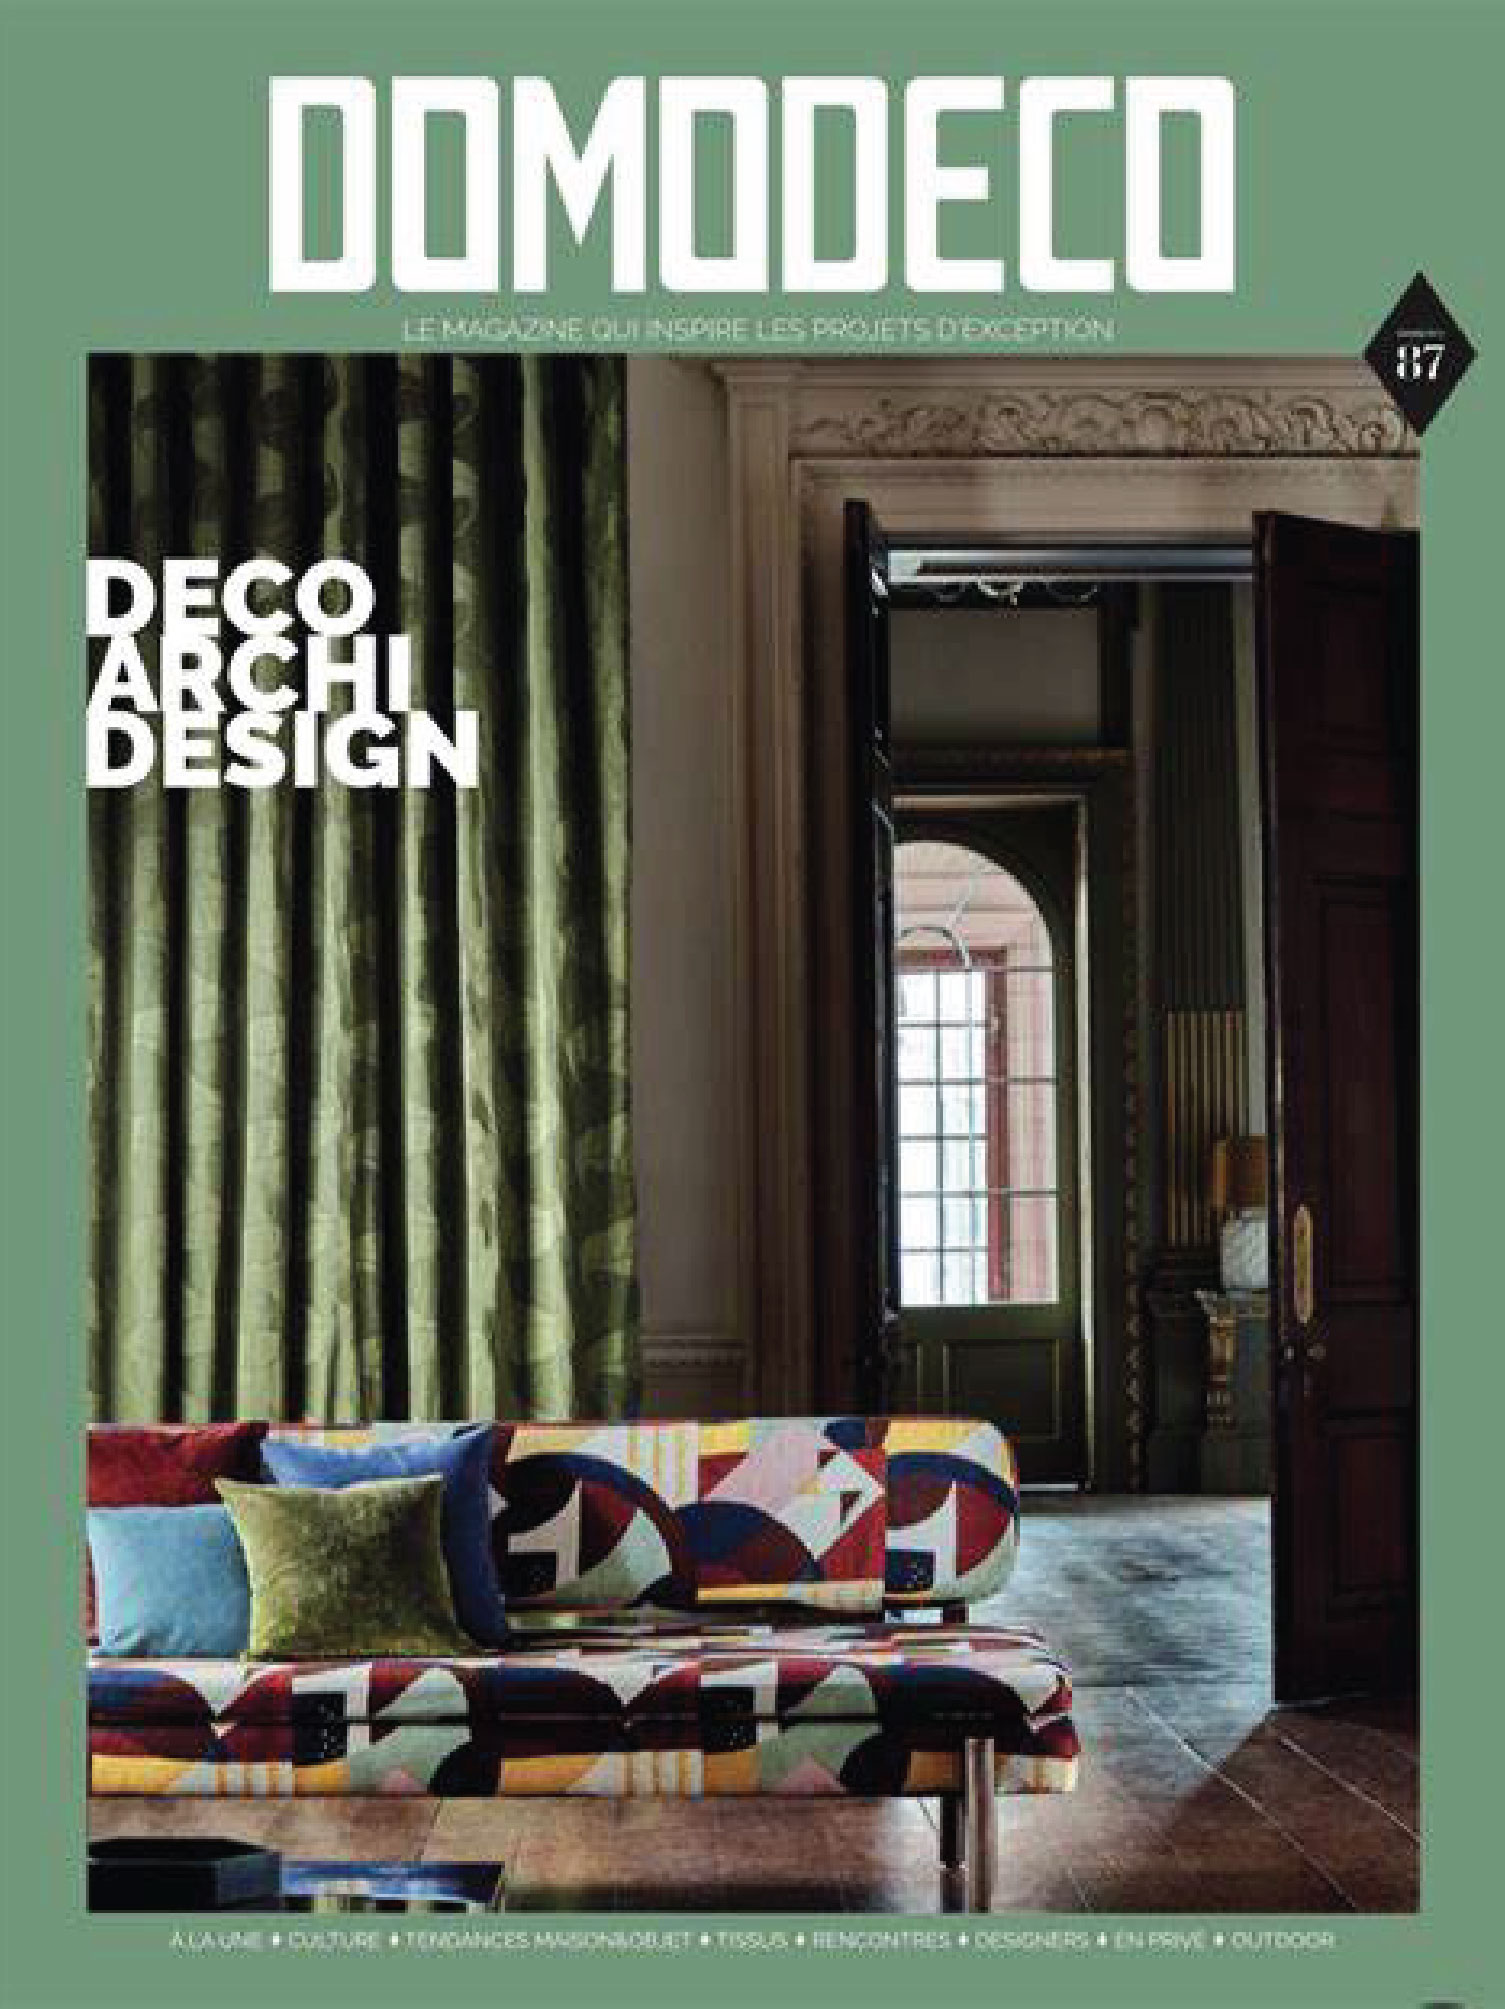 cover of the magazine domodeco march 2019